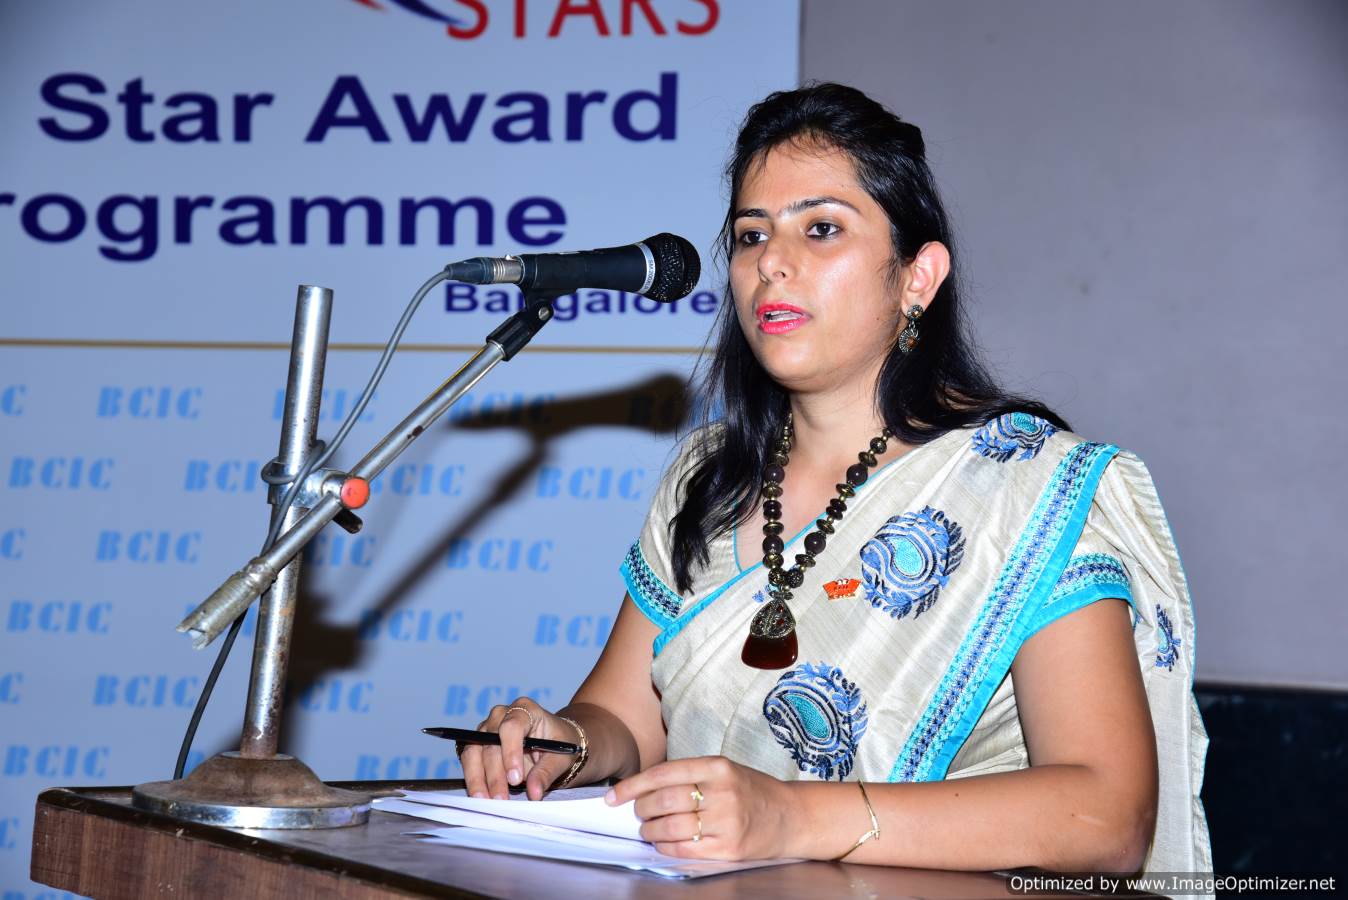 Bcic-awards-gallery-image-8